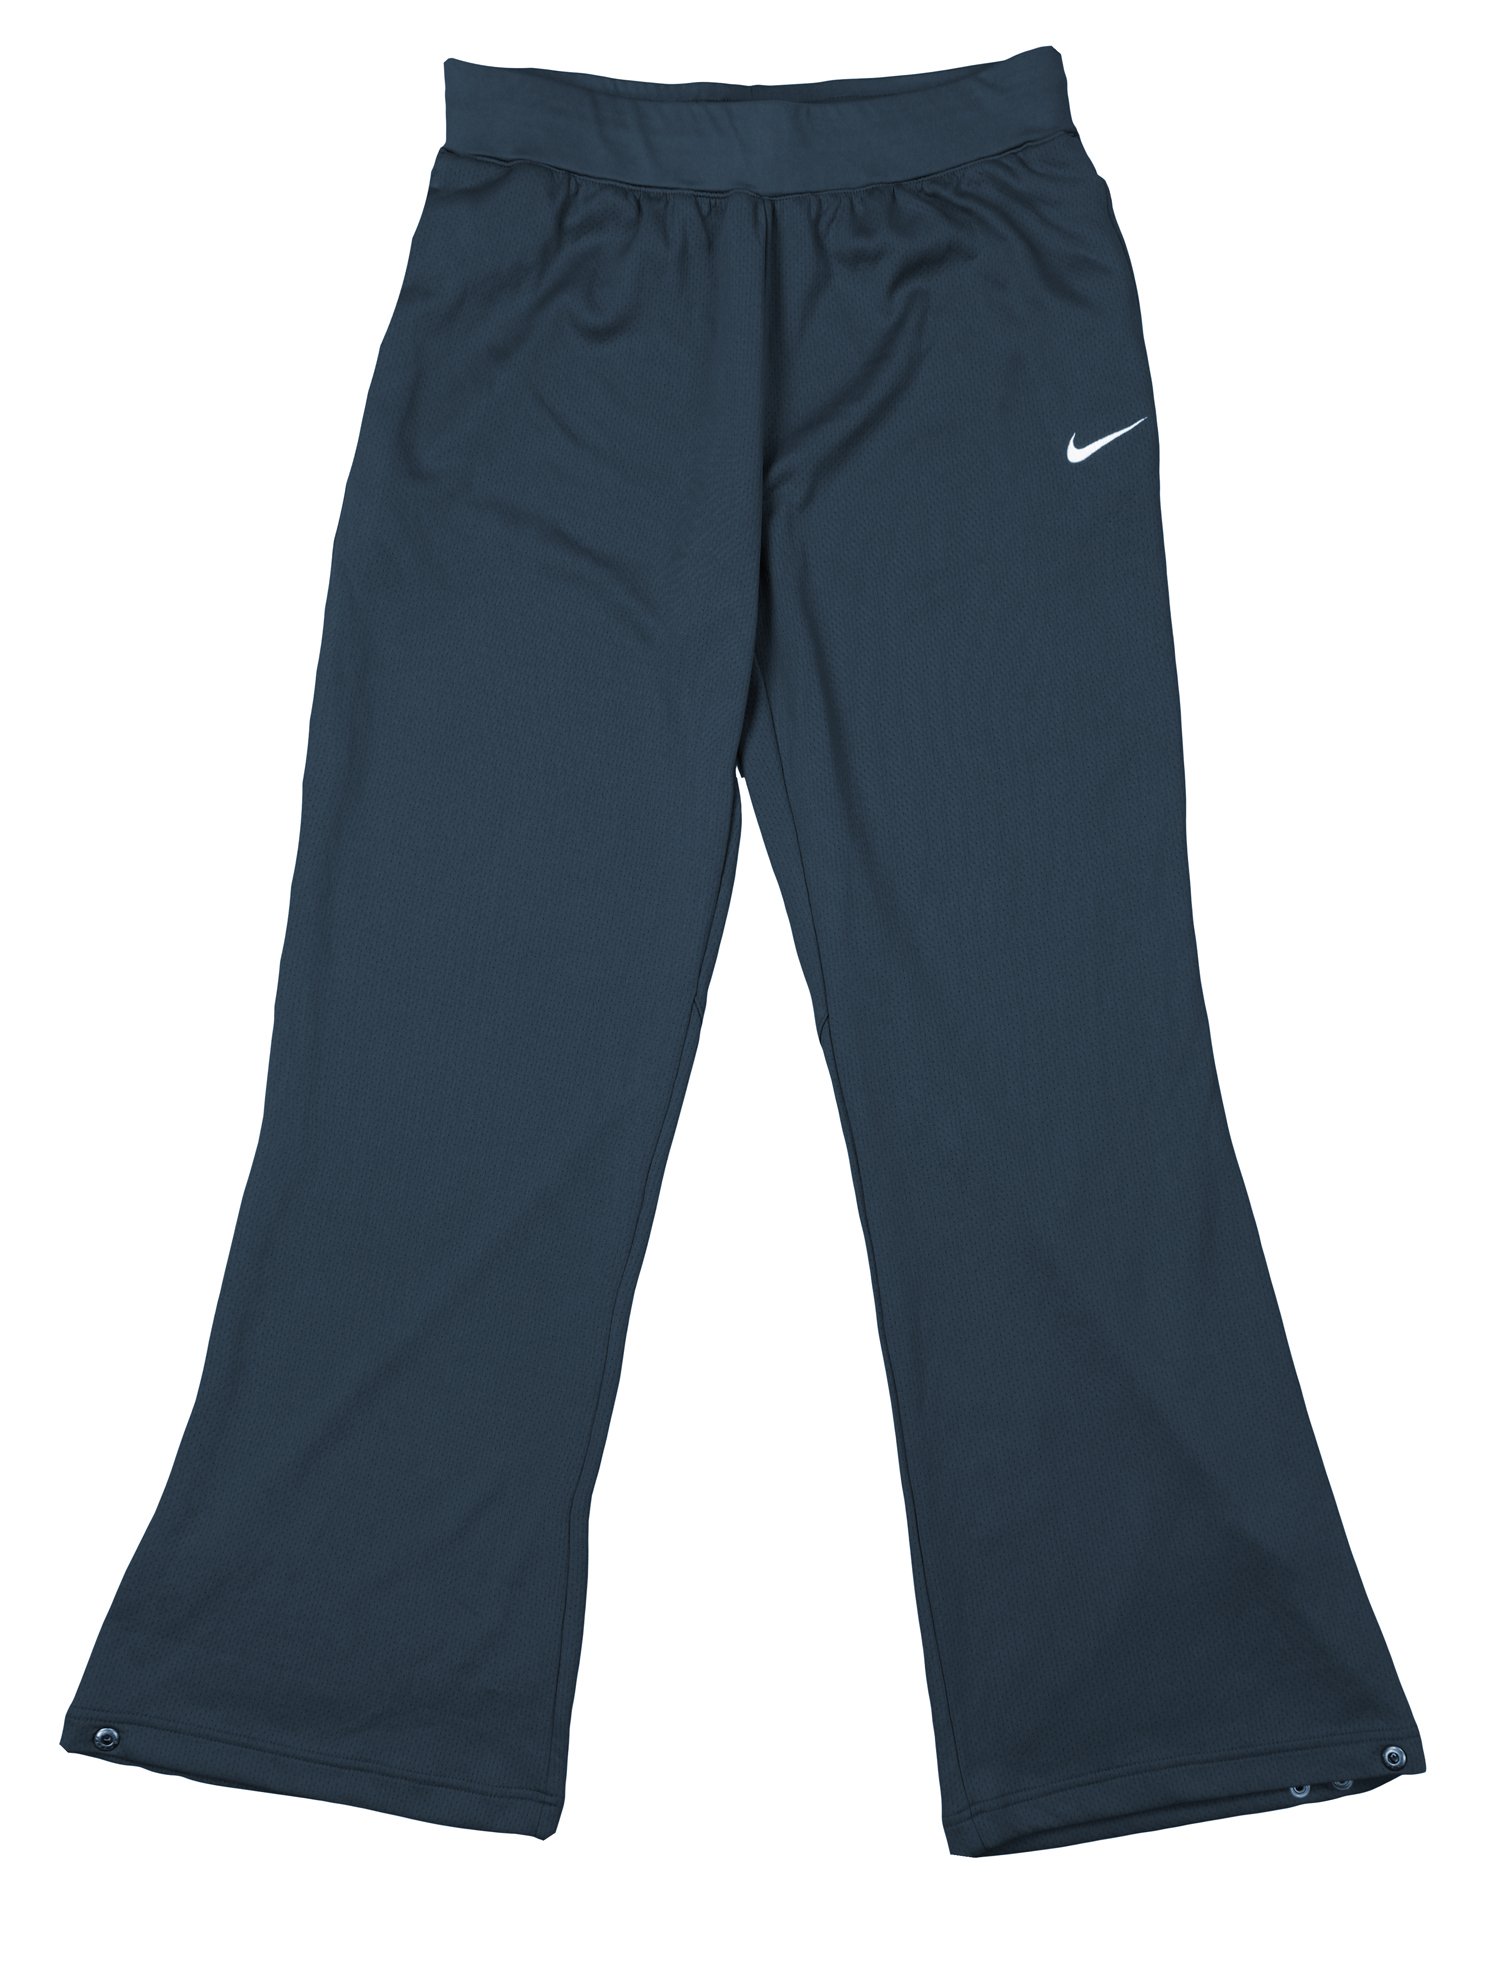 Nike Women's Road Trip Athletic Pants - Many Colors - image 1 of 1